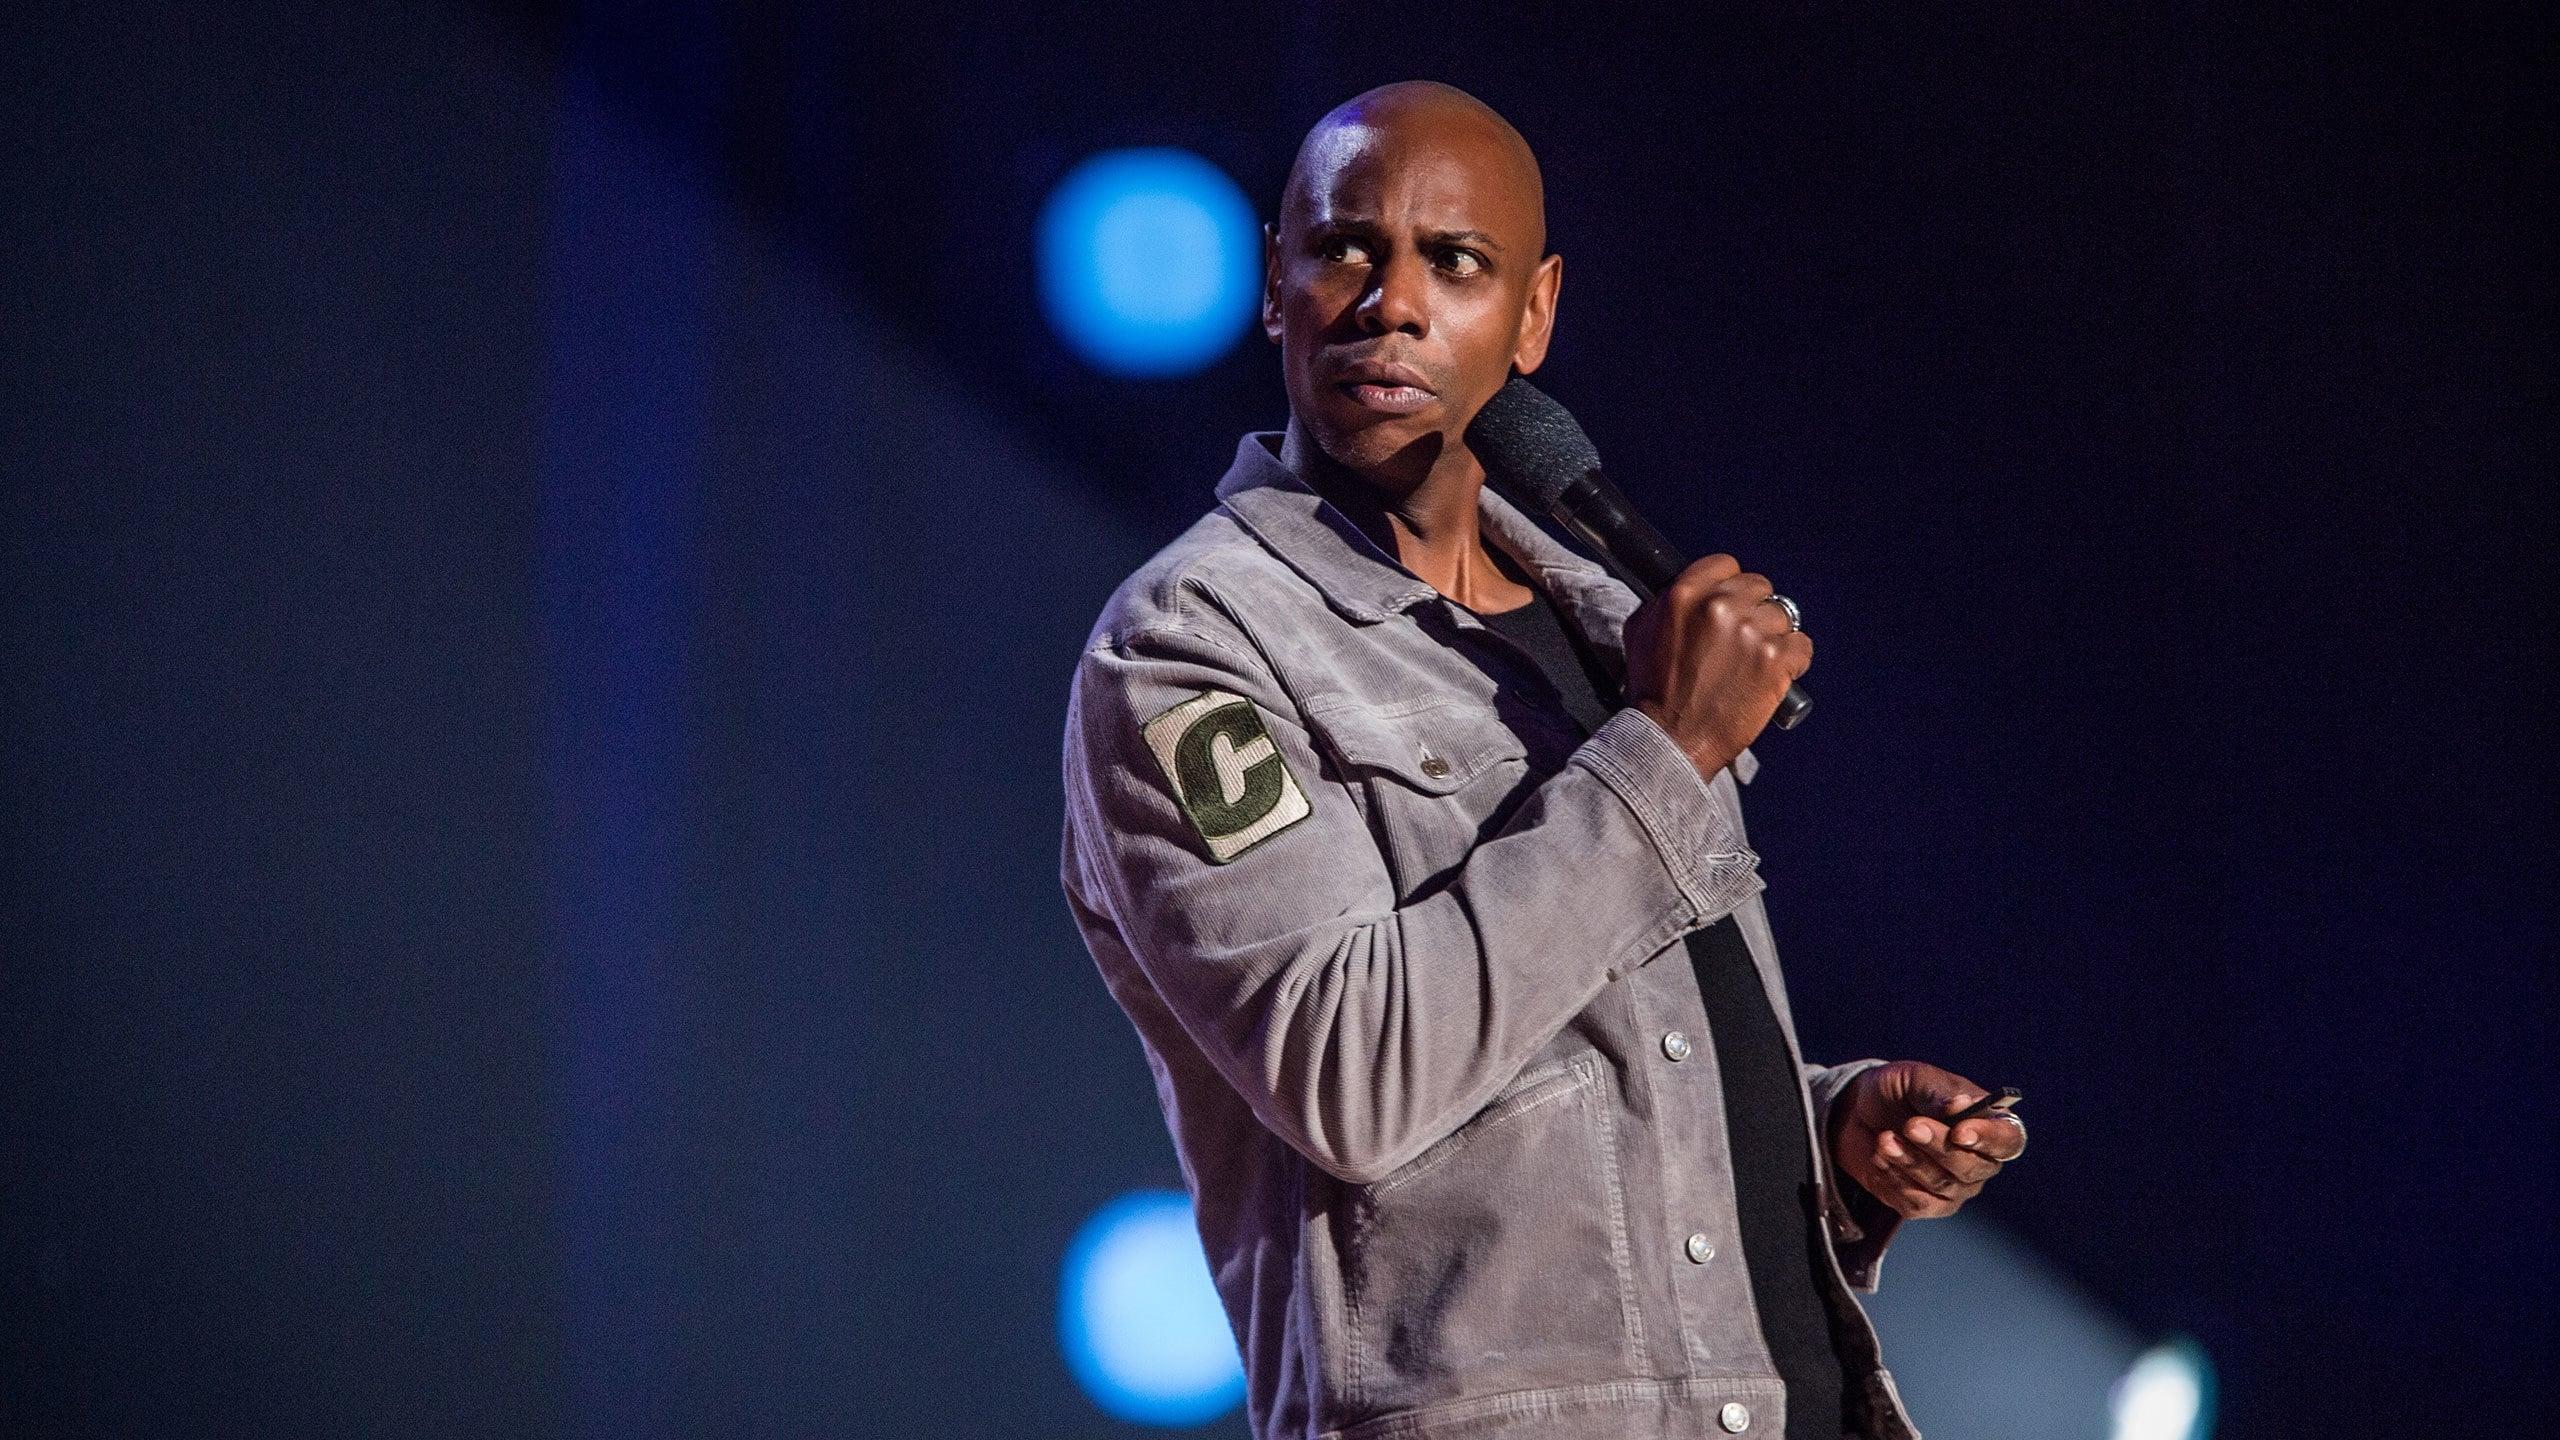 Dave Chappelle: Equanimity backdrop